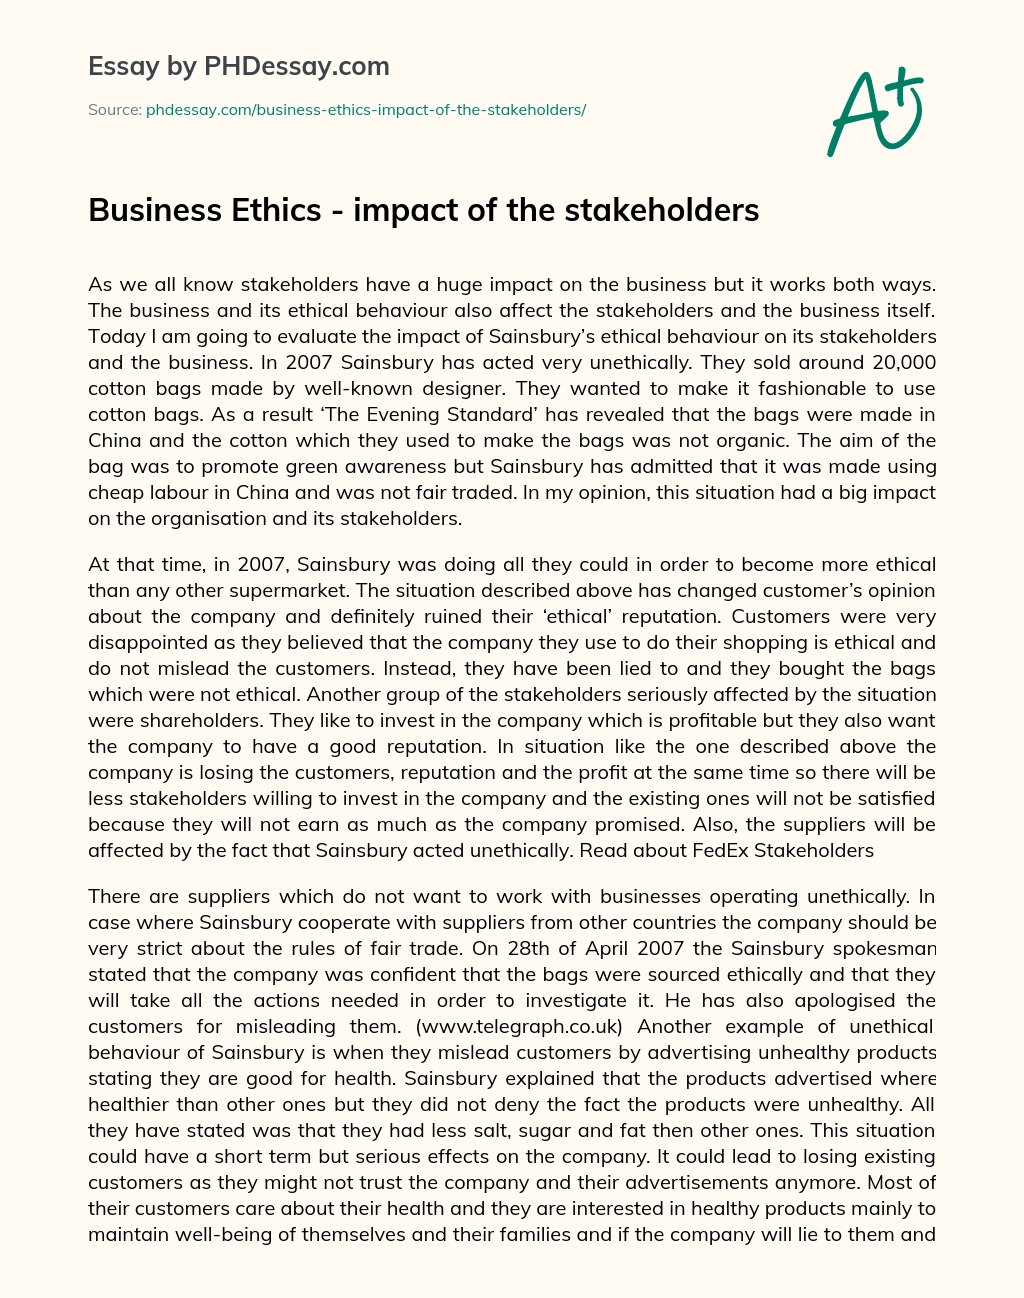 Business Ethics – impact of the stakeholders essay